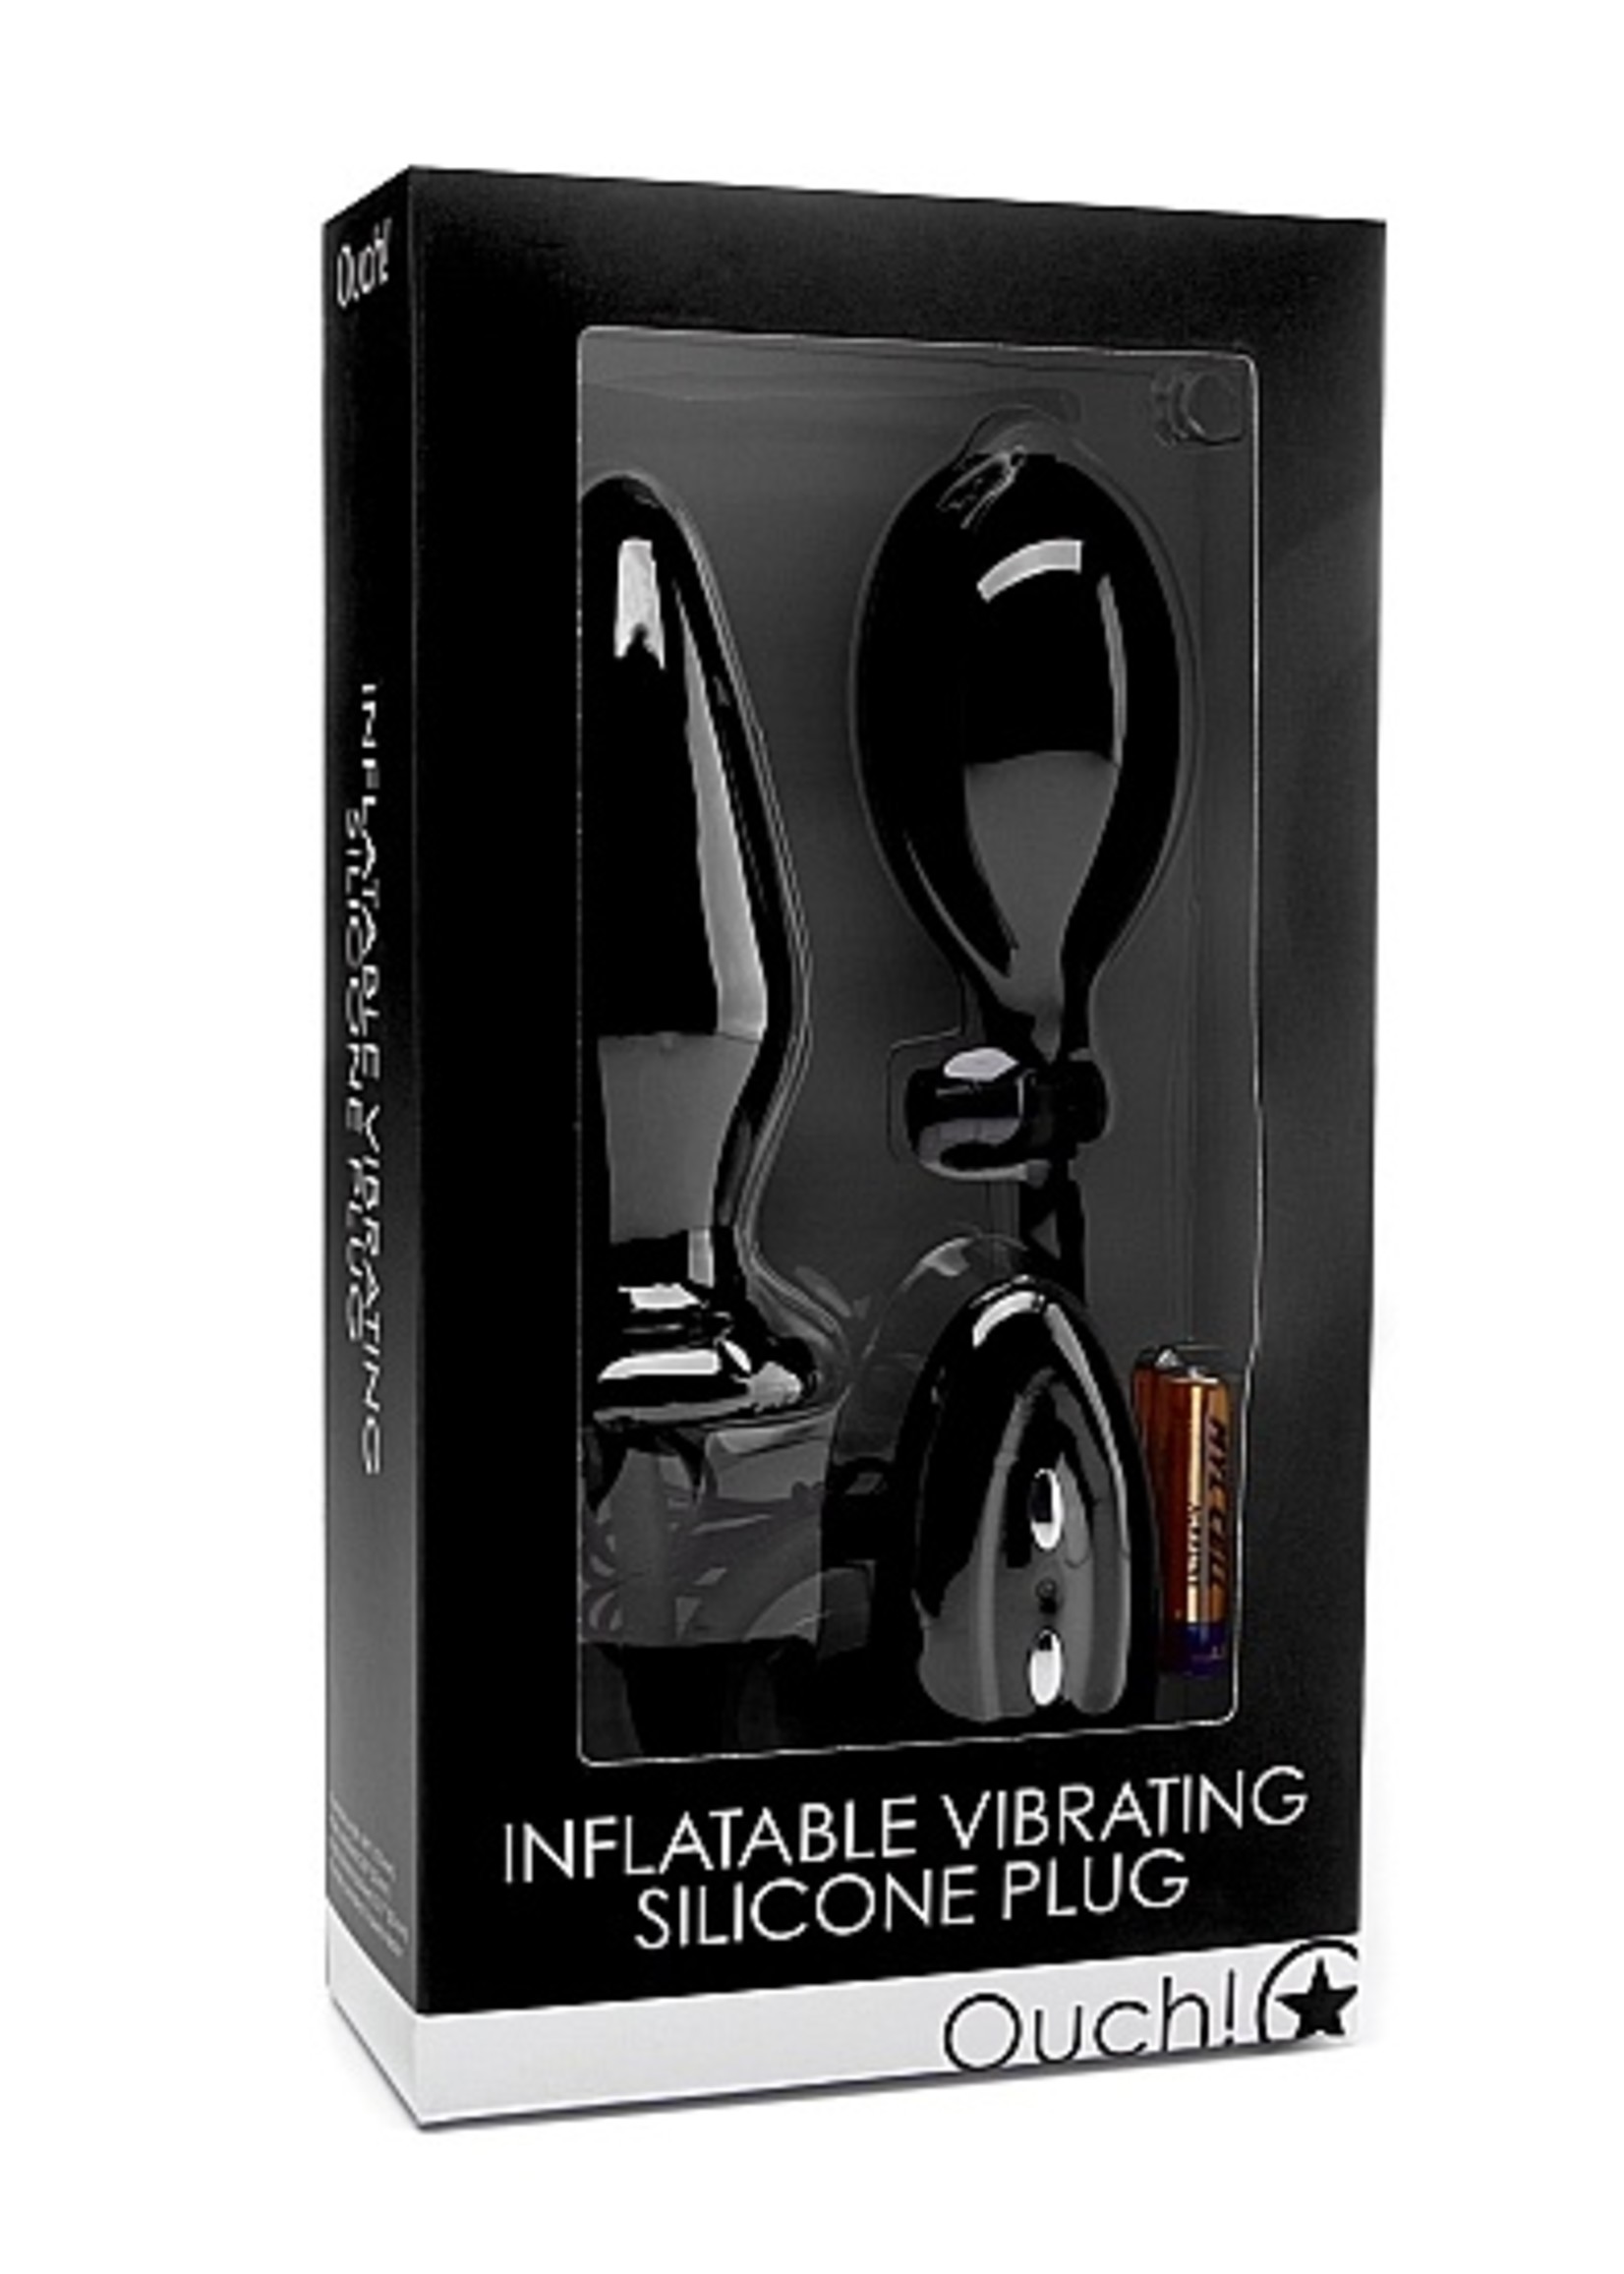 Ouch! Inflatable vibrating silicone plug - black